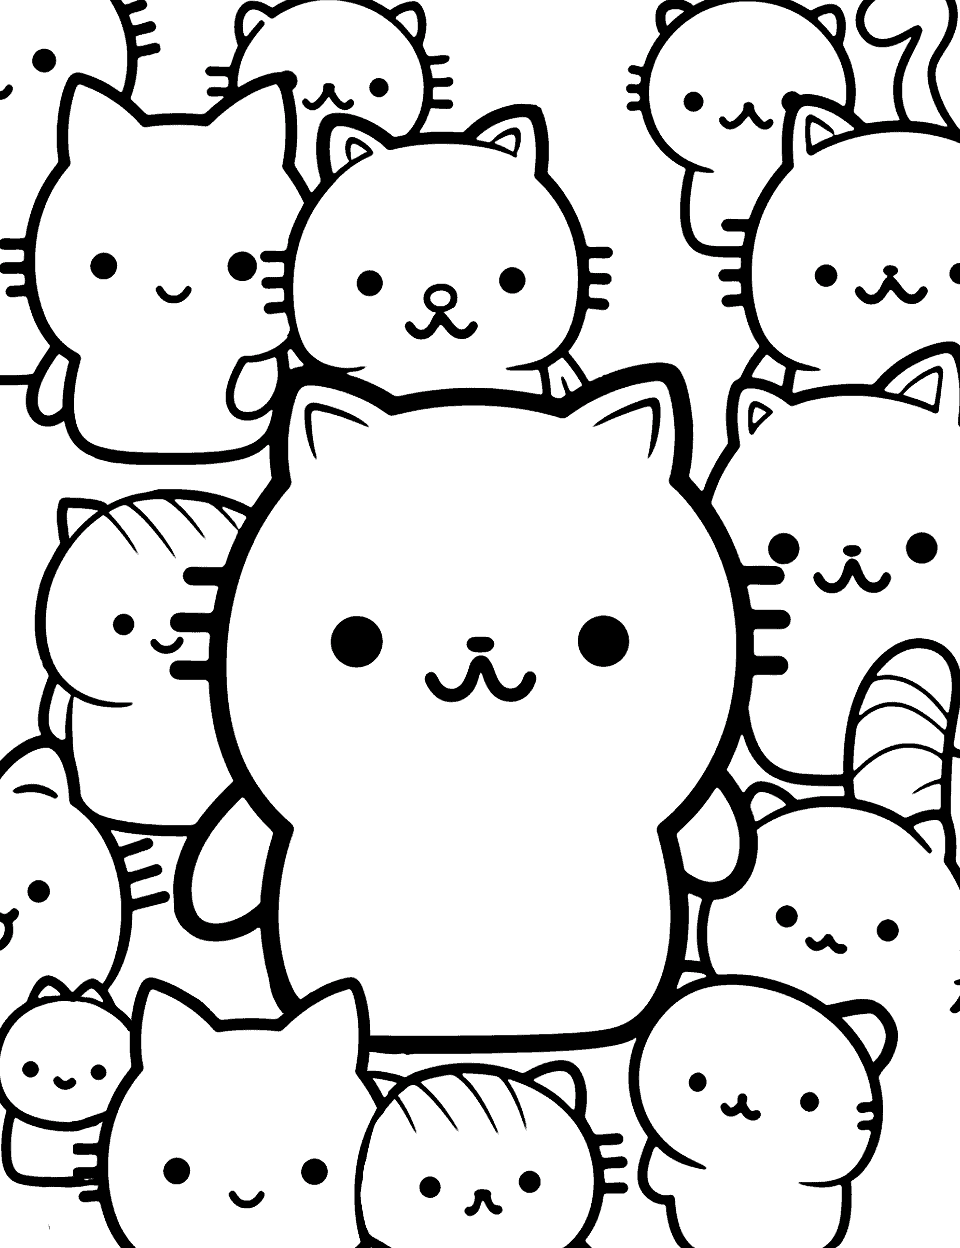 Easy Kawaii Animal Doodle Coloring Page - An easy doodle for beginners featuring a cat.